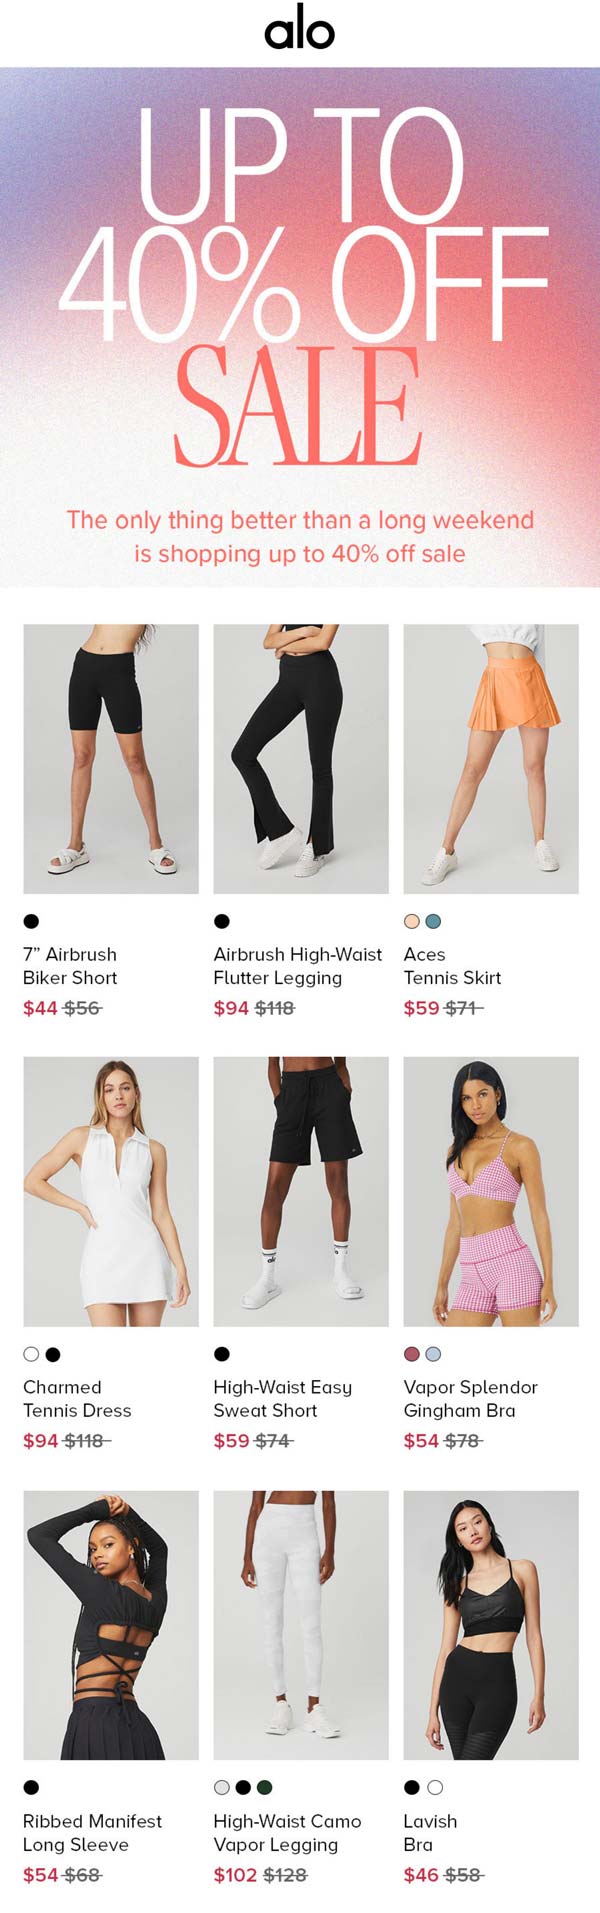 Alo stores Coupon  40% off various sale items at Alo yoga #alo 